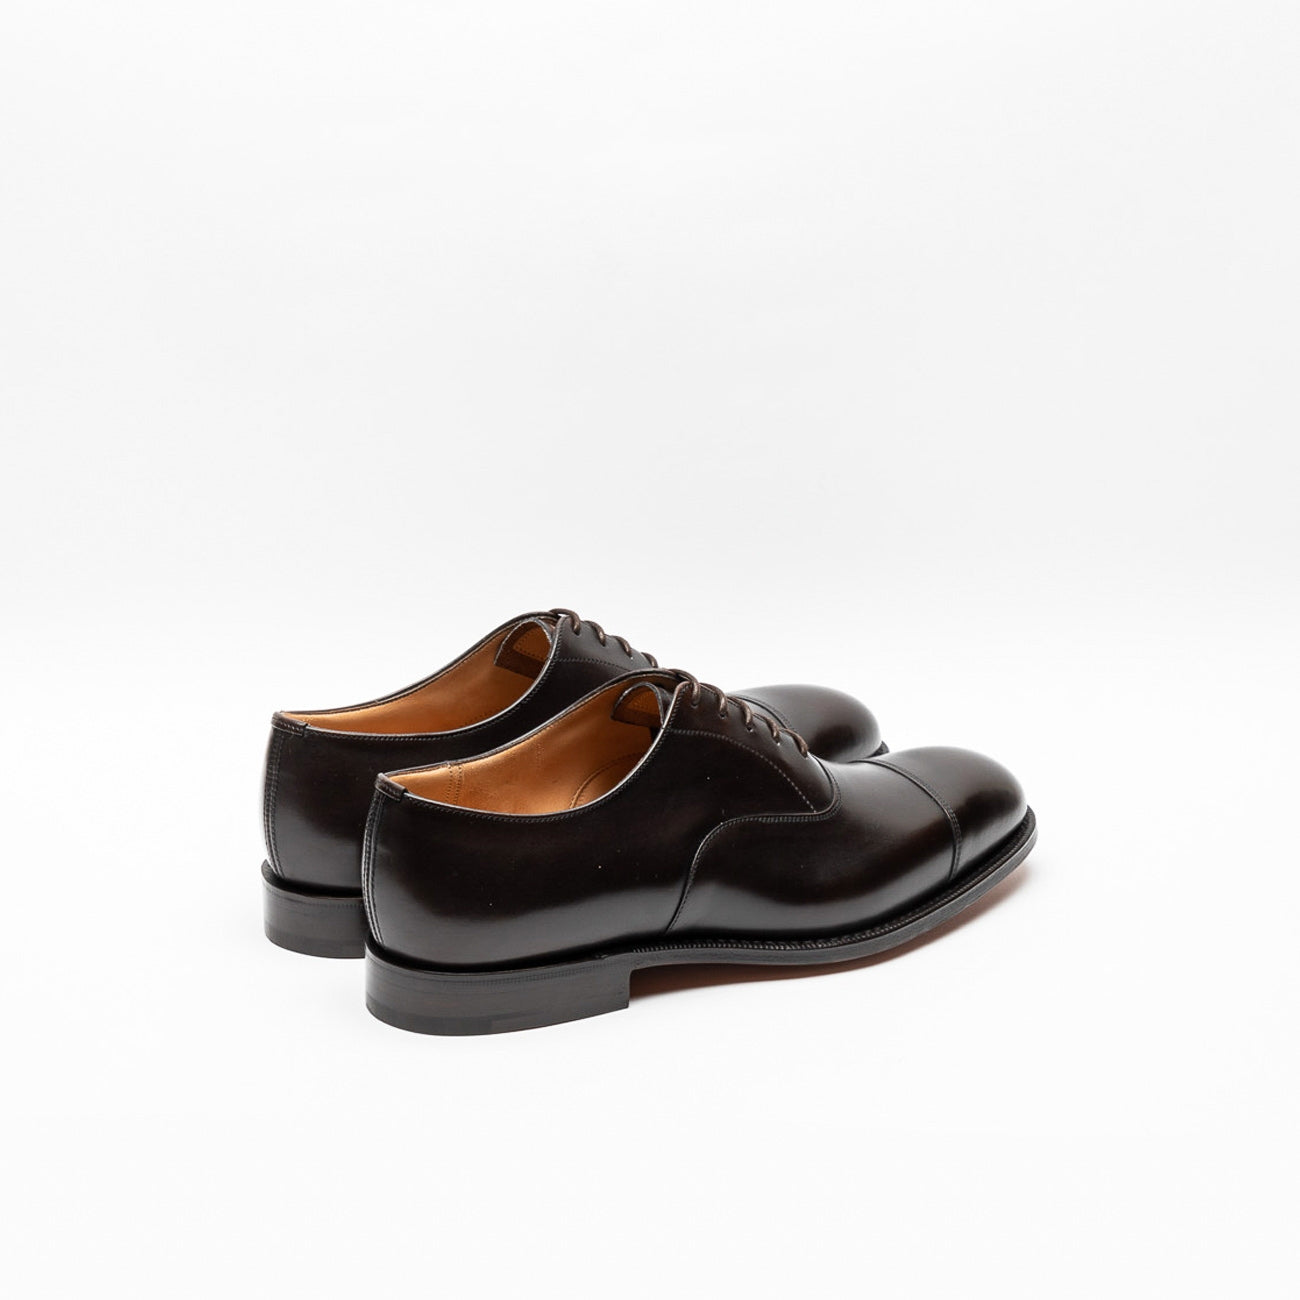 Church's Consul 173 oxford lace-up in brown leather (Burnt Superior Calf)